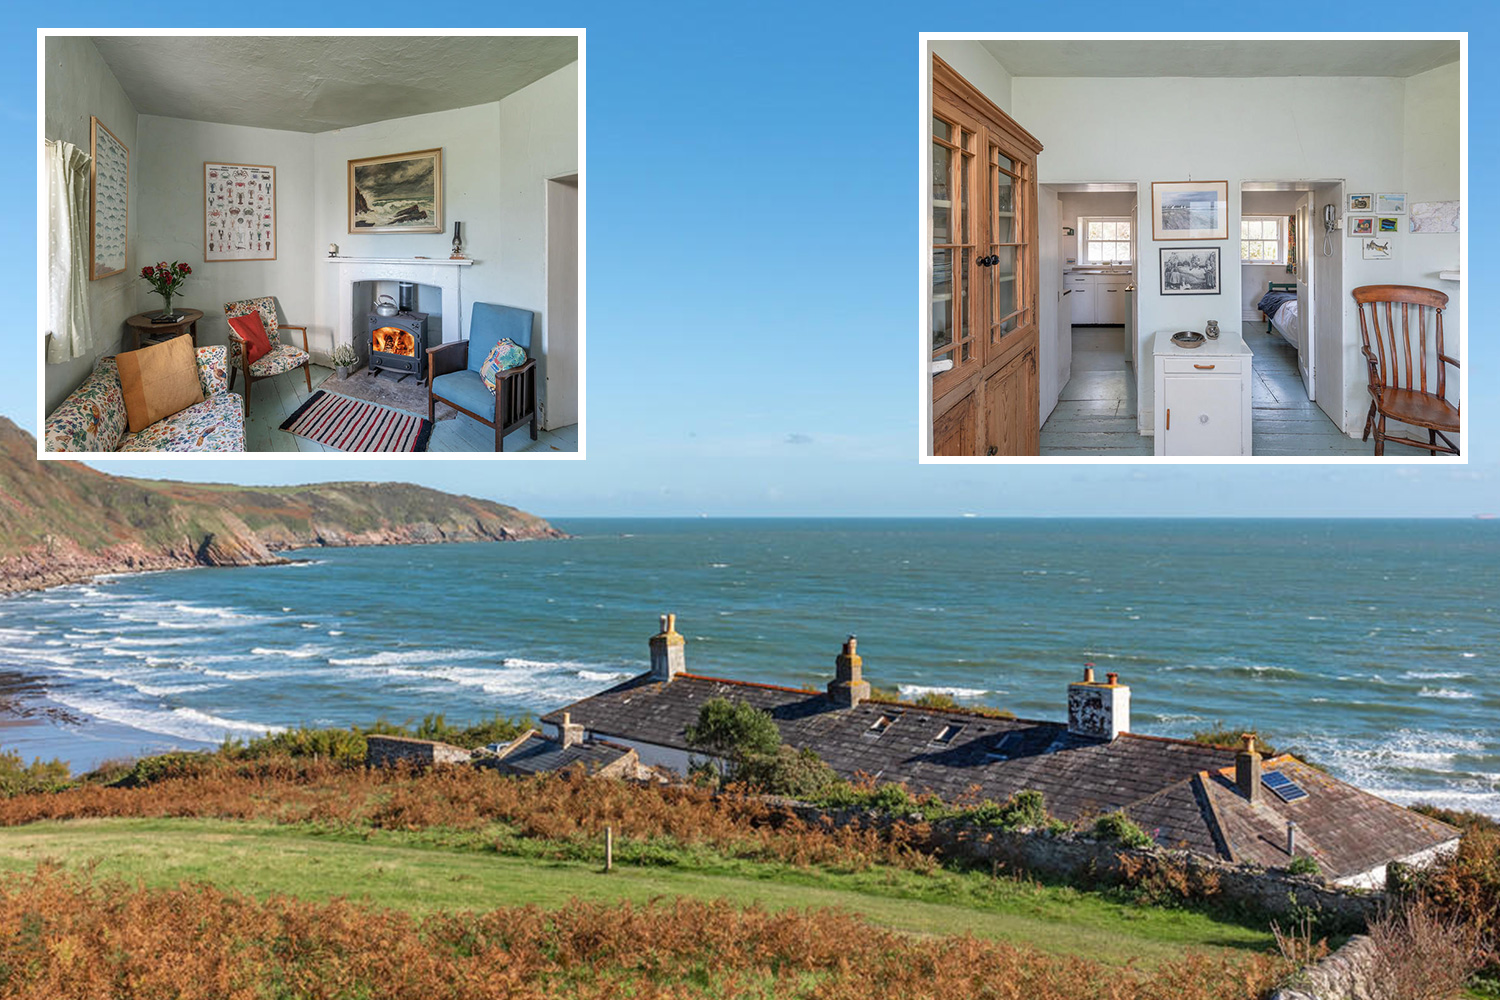 UK's loneliest holiday home with no gas, electric or TOILET on sale for £550k